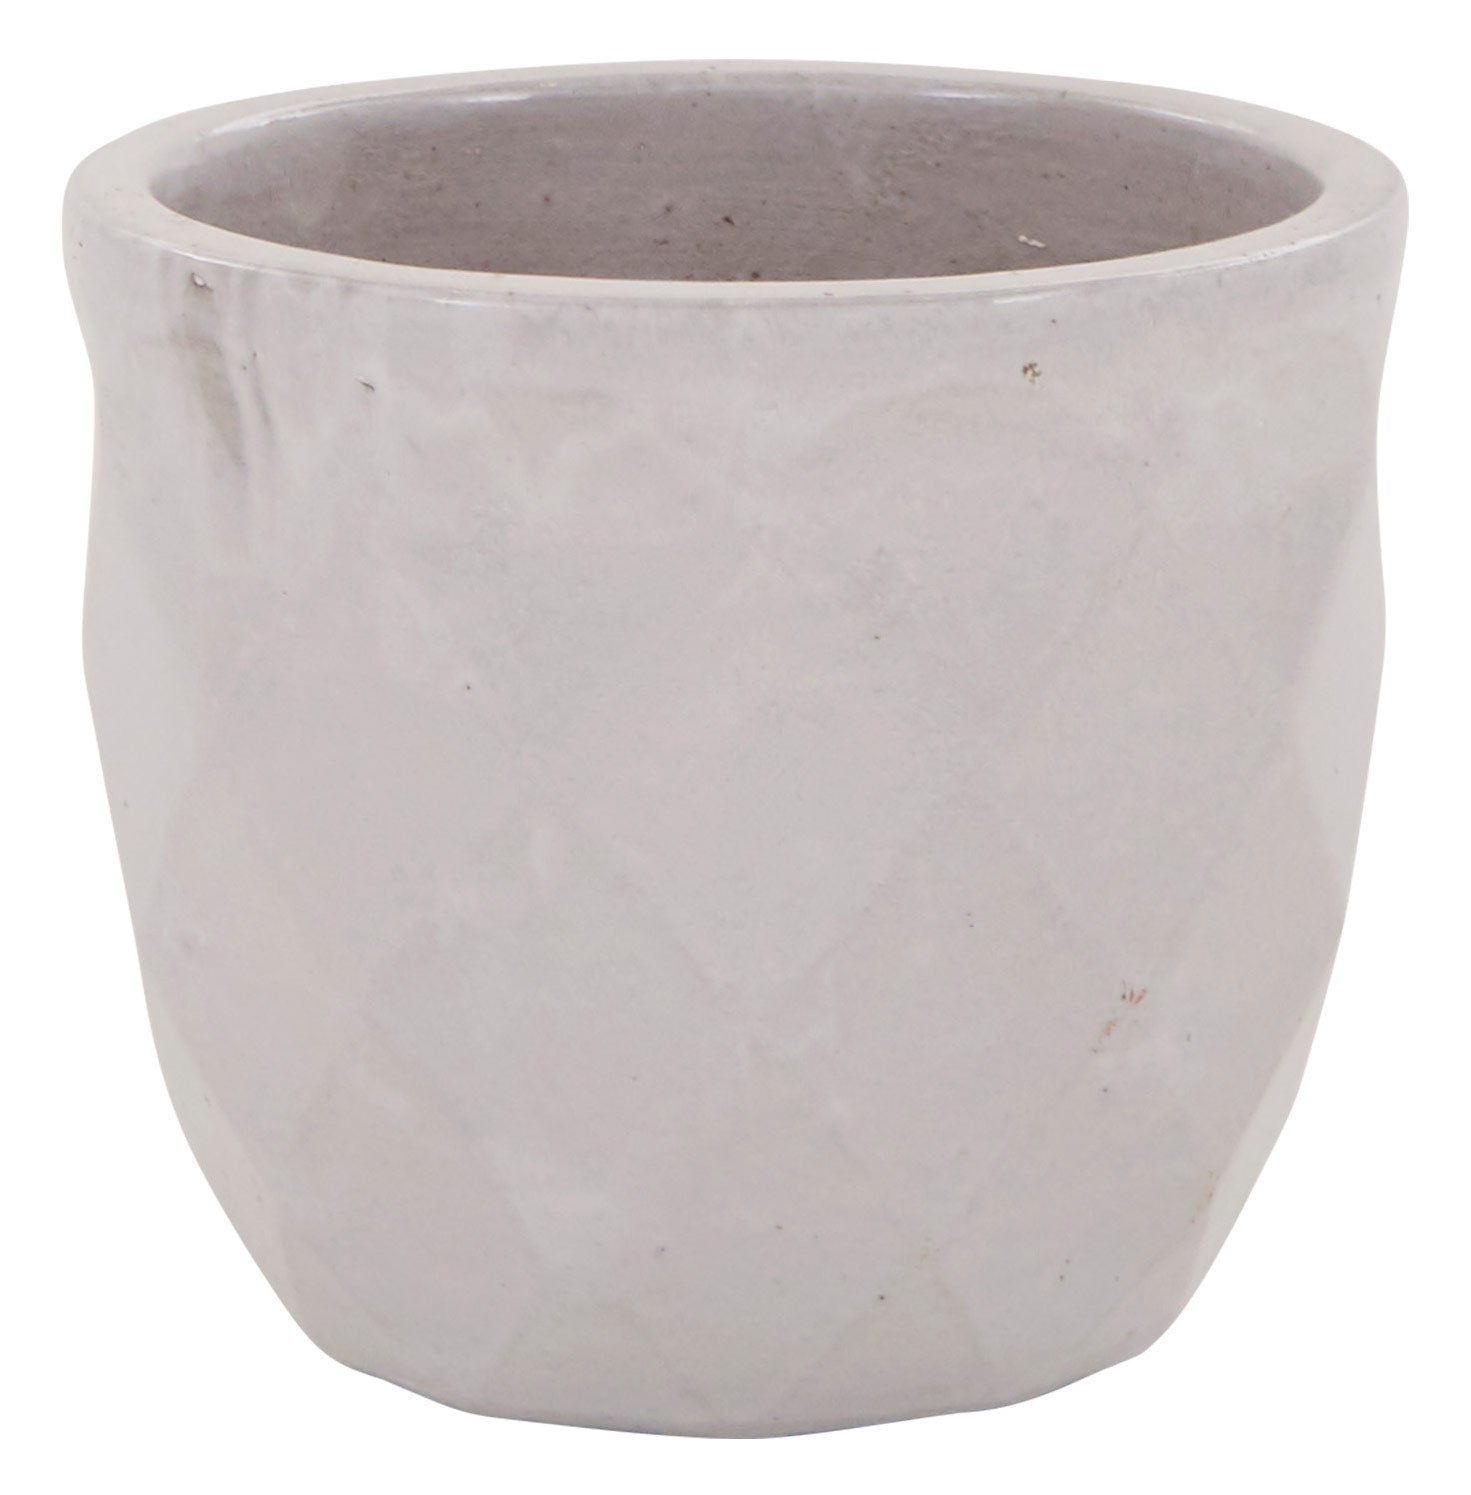 Faceted White Pots